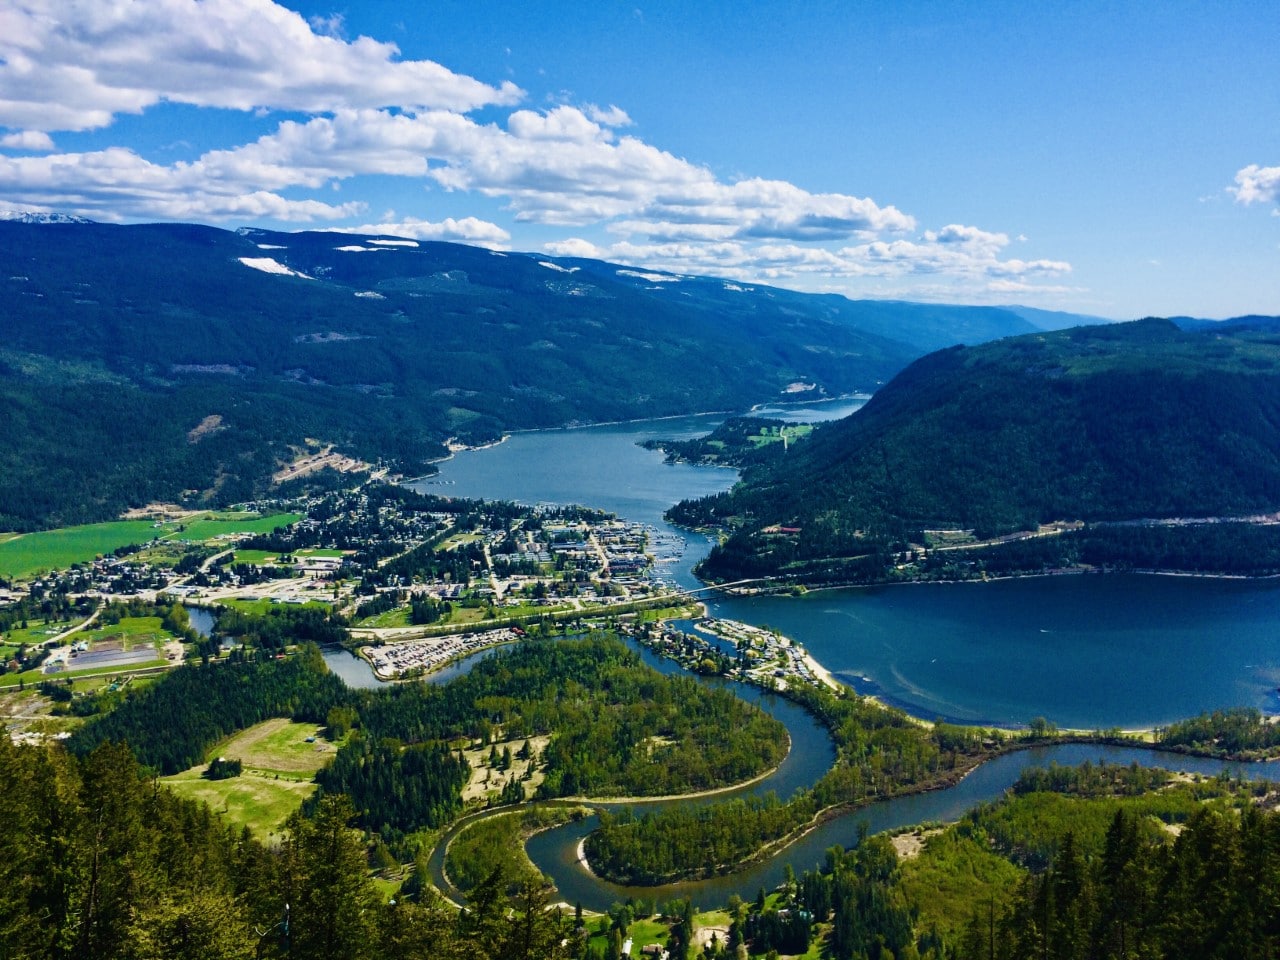 Image 9 Views over Sicamous, Shuswap Lake, and The Eagle River from Sicamous Lookout